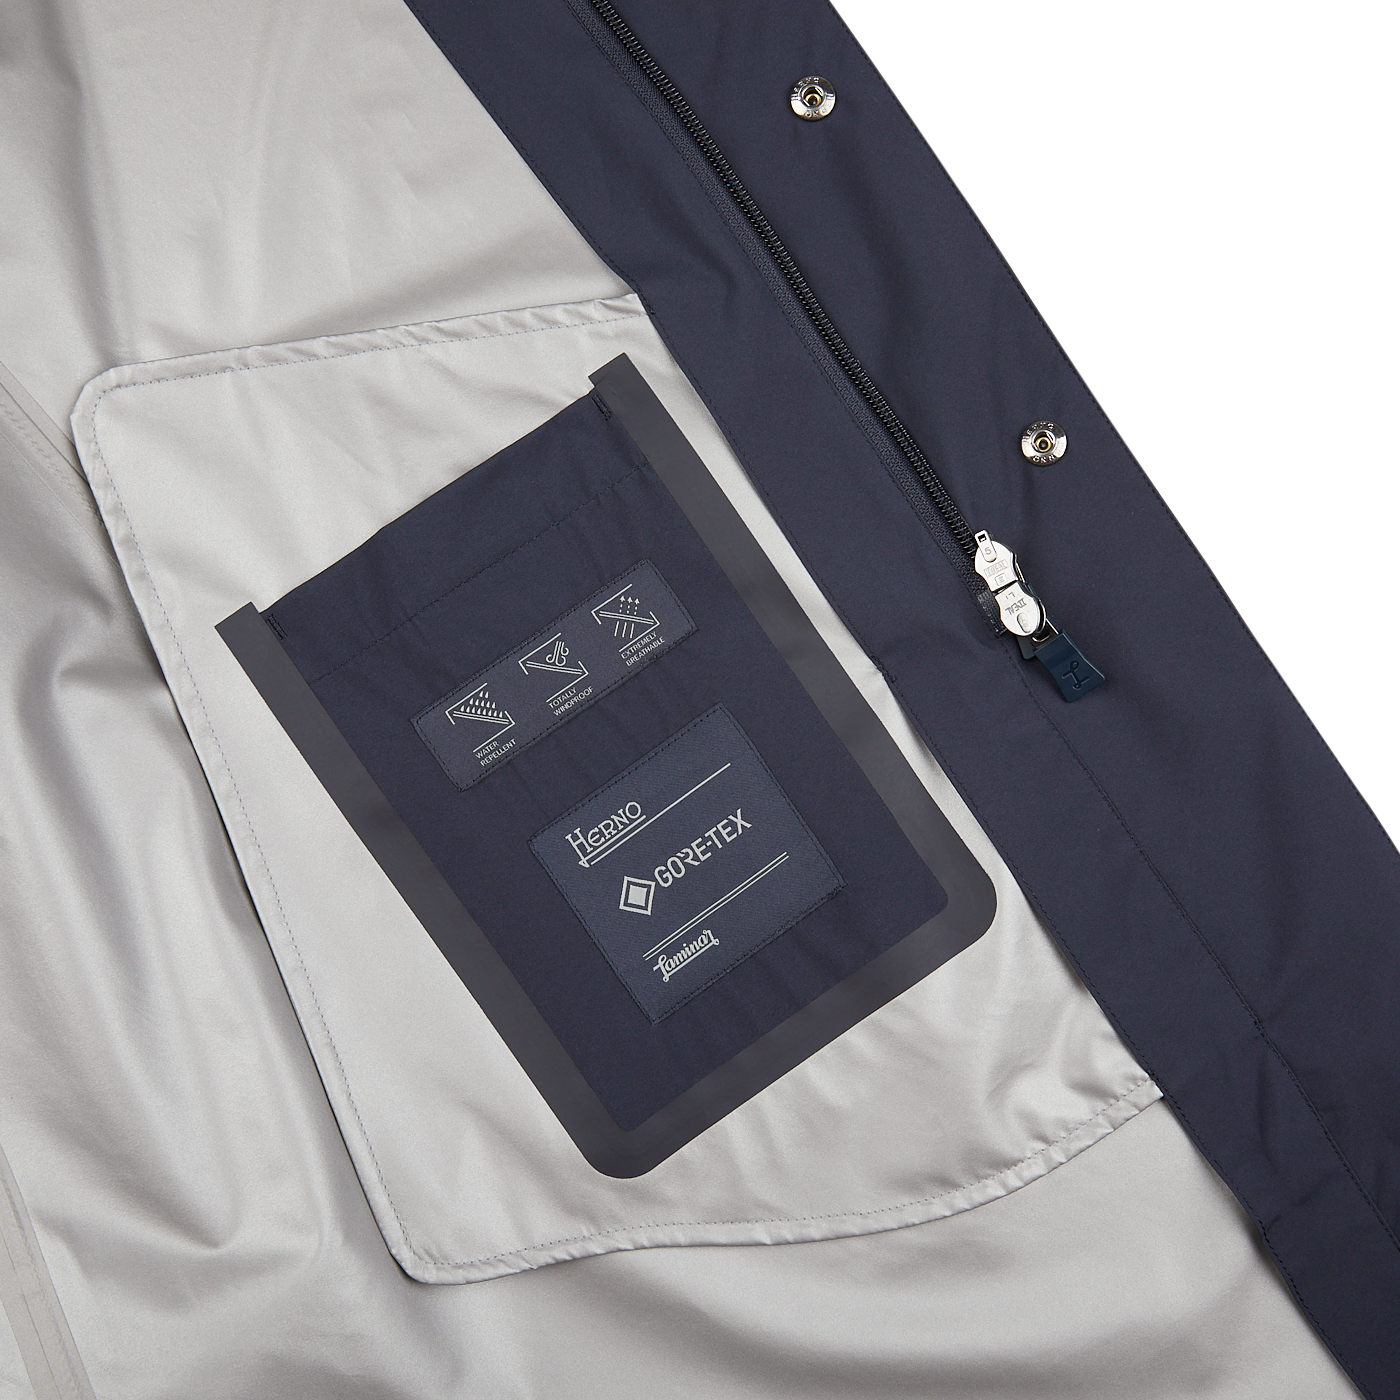 A Navy Blue Nylon Laminar Car Coat by Herno with a pocket and label on it.